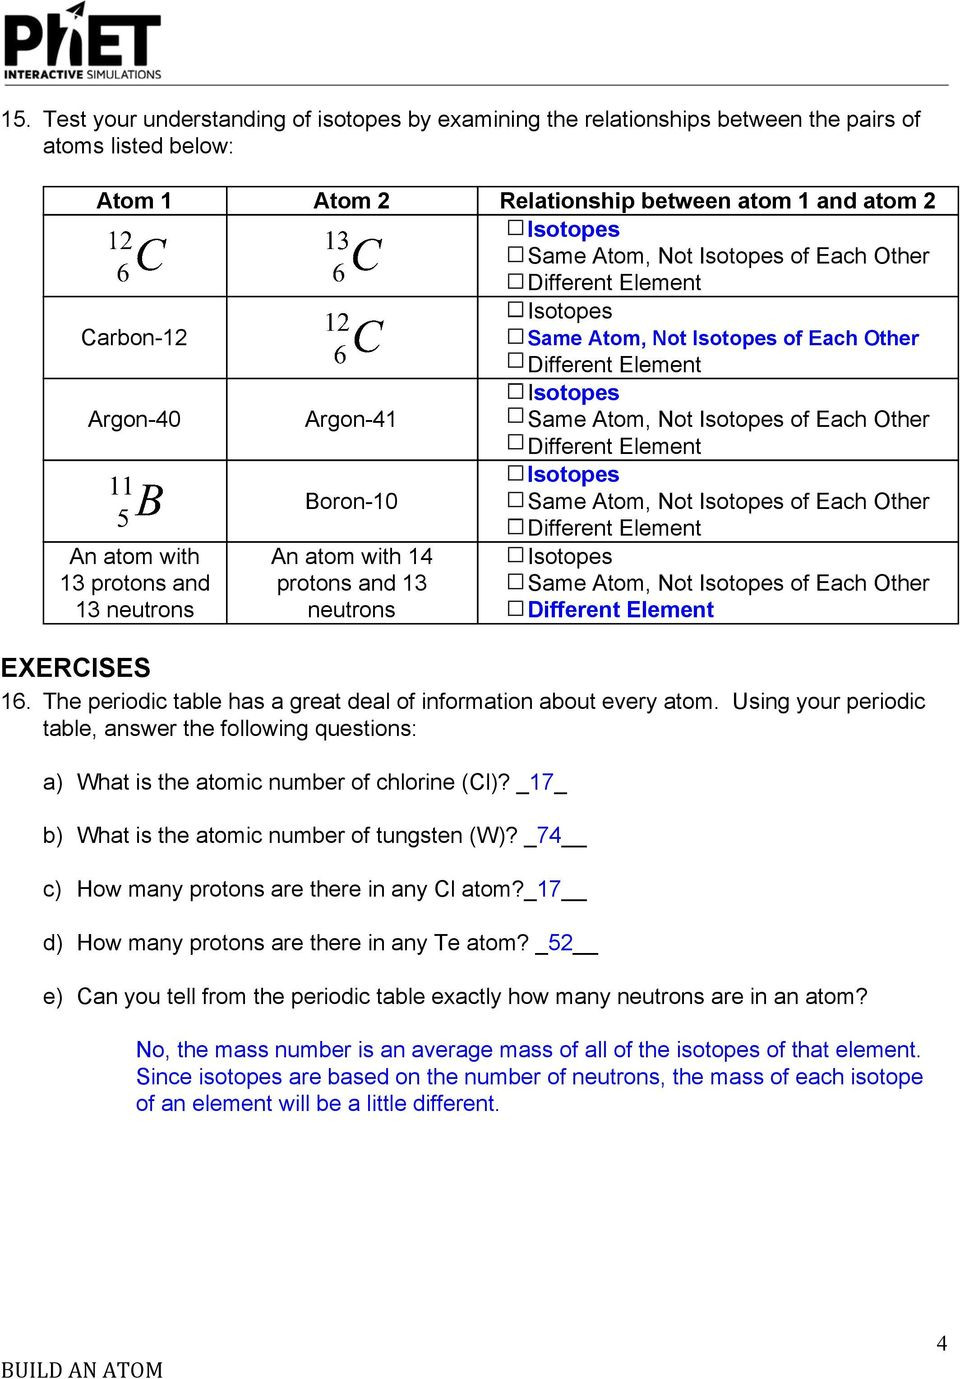 Atoms and isotopes Worksheet Answers isotopes Worksheet Answers Part 3